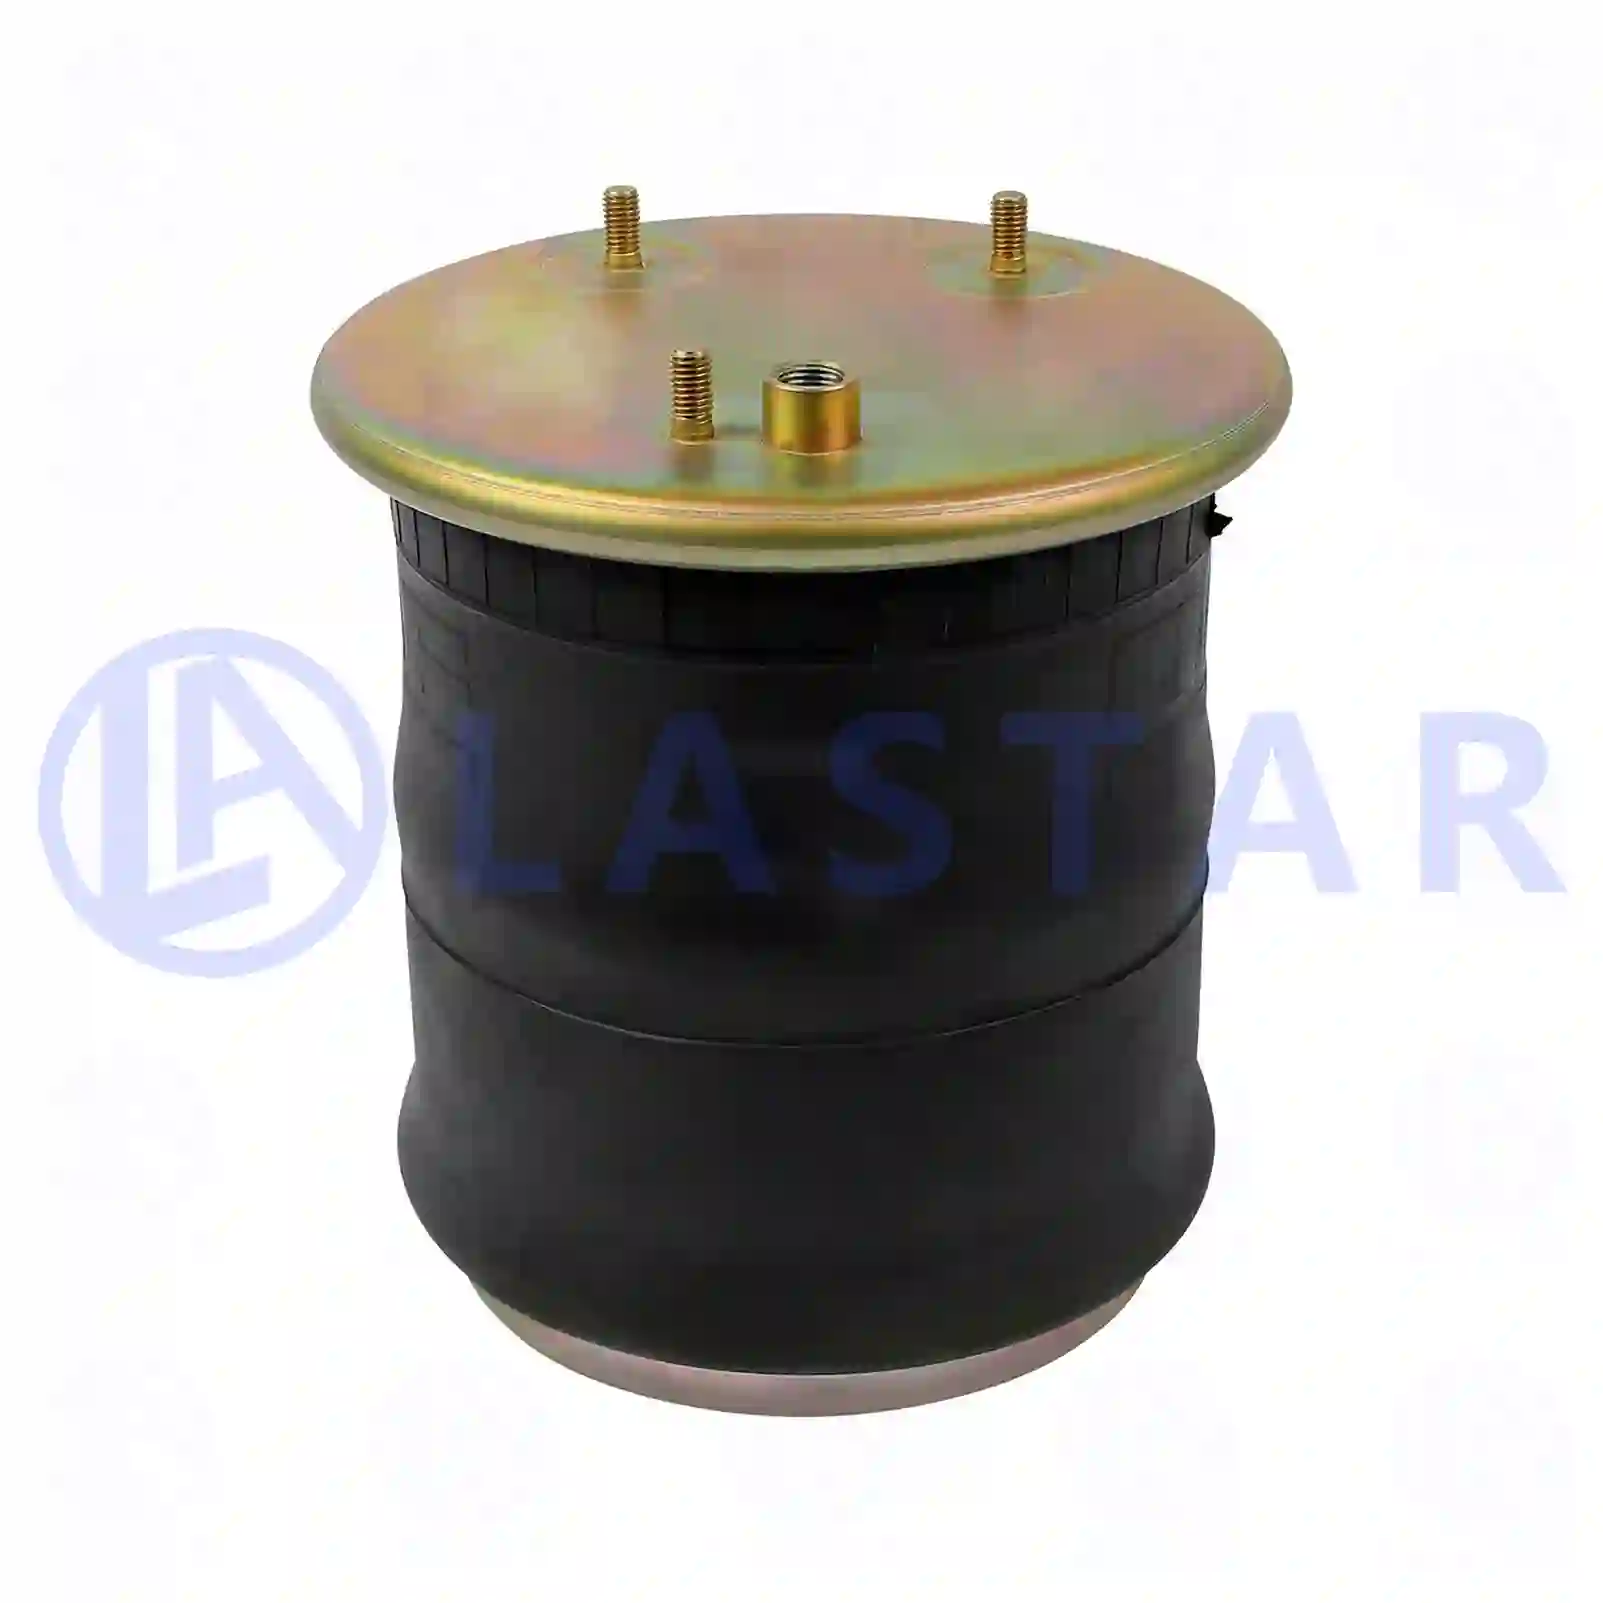 Air spring, with steel piston, 77728511, 1240503, 1697685 ||  77728511 Lastar Spare Part | Truck Spare Parts, Auotomotive Spare Parts Air spring, with steel piston, 77728511, 1240503, 1697685 ||  77728511 Lastar Spare Part | Truck Spare Parts, Auotomotive Spare Parts